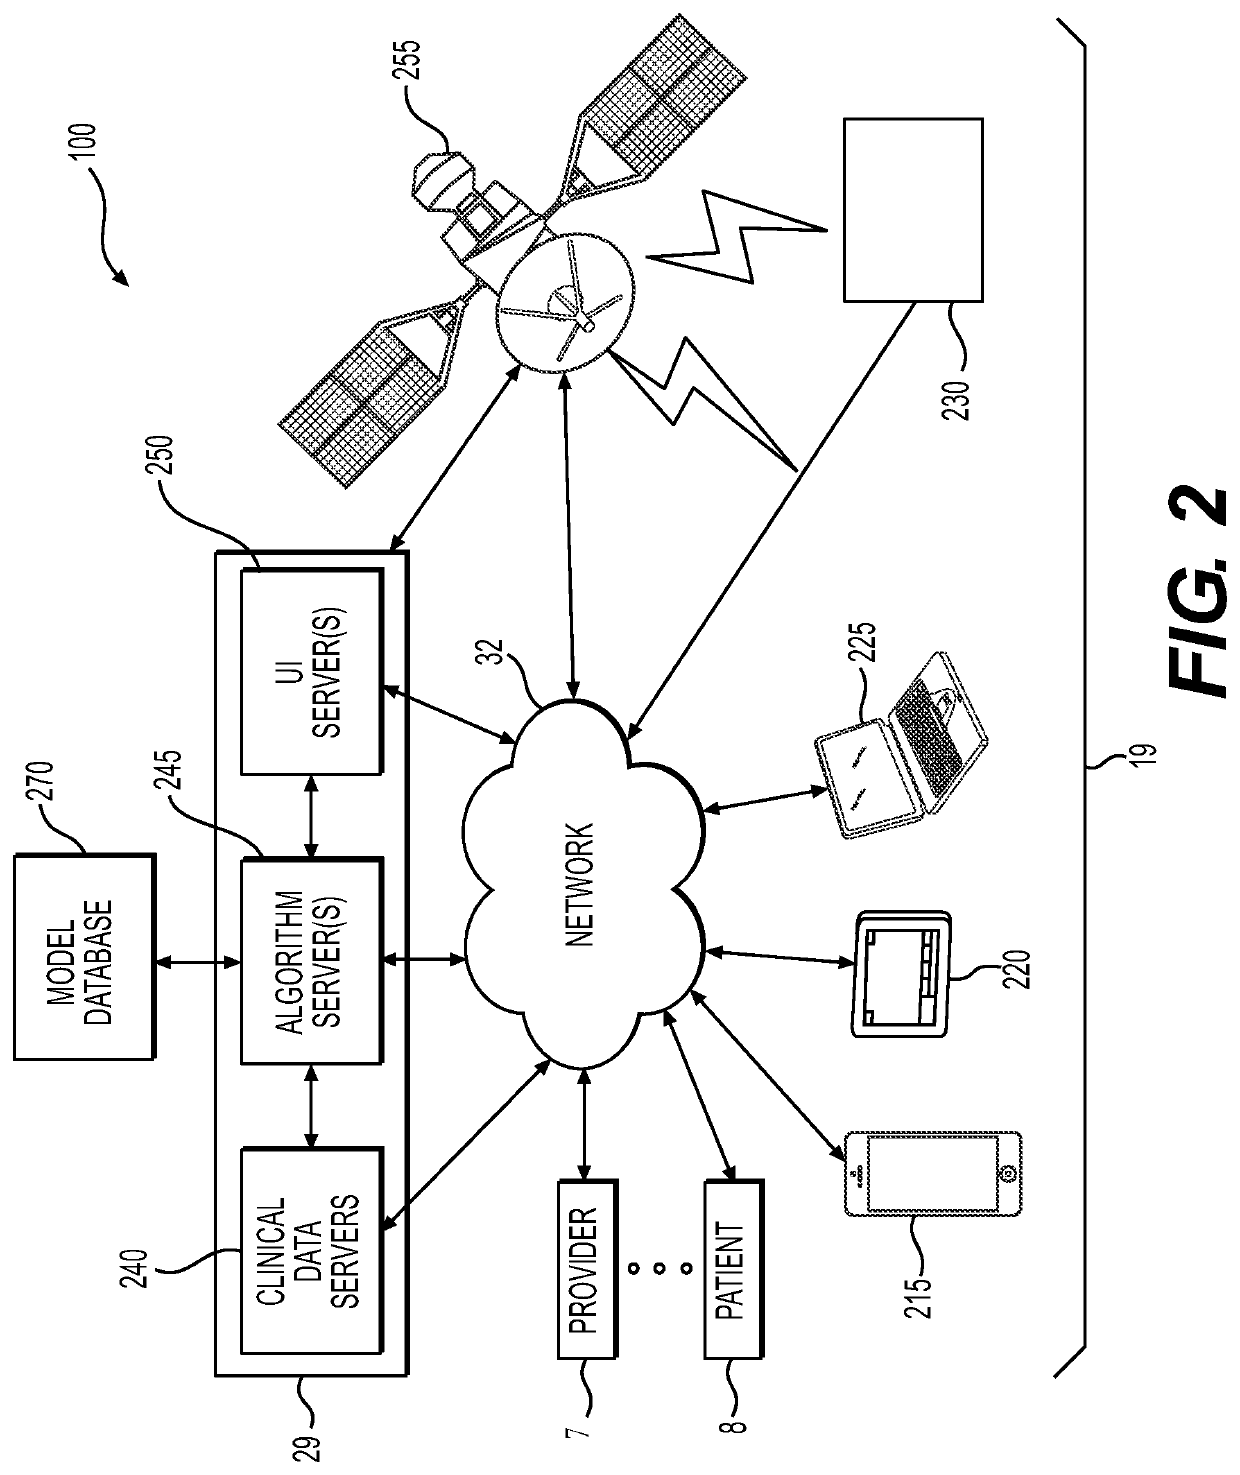 Digital therapeutic systems and methods